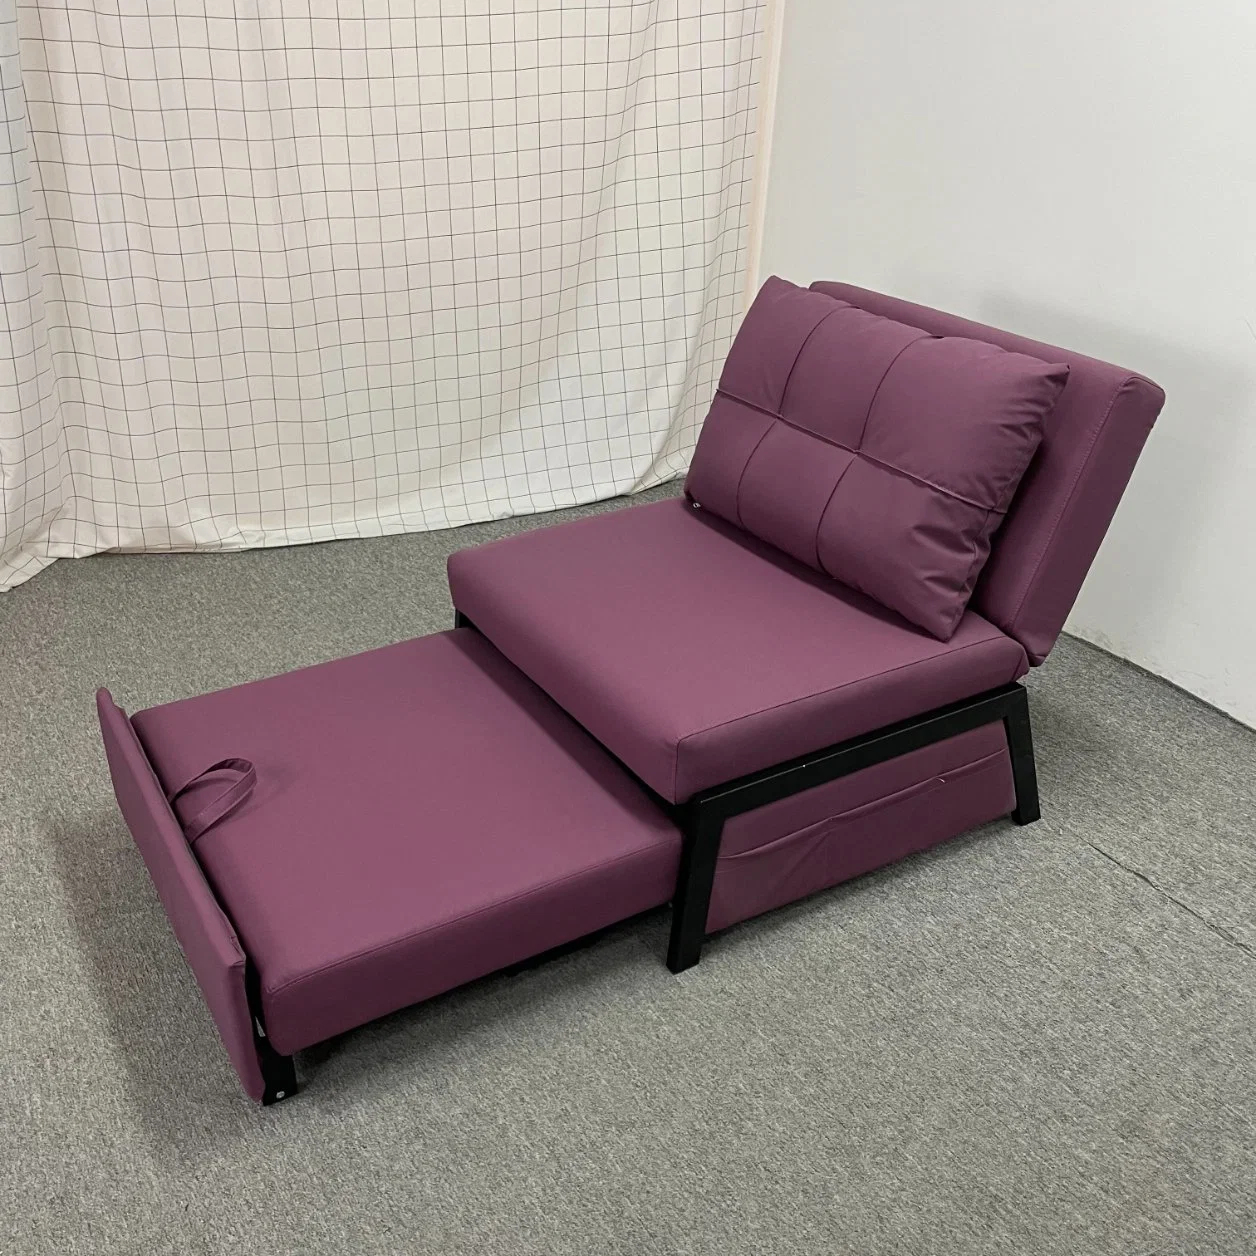 Faltbares Sofa Multifunktions-Technologie Tuch Hotel Home Schlafsofa